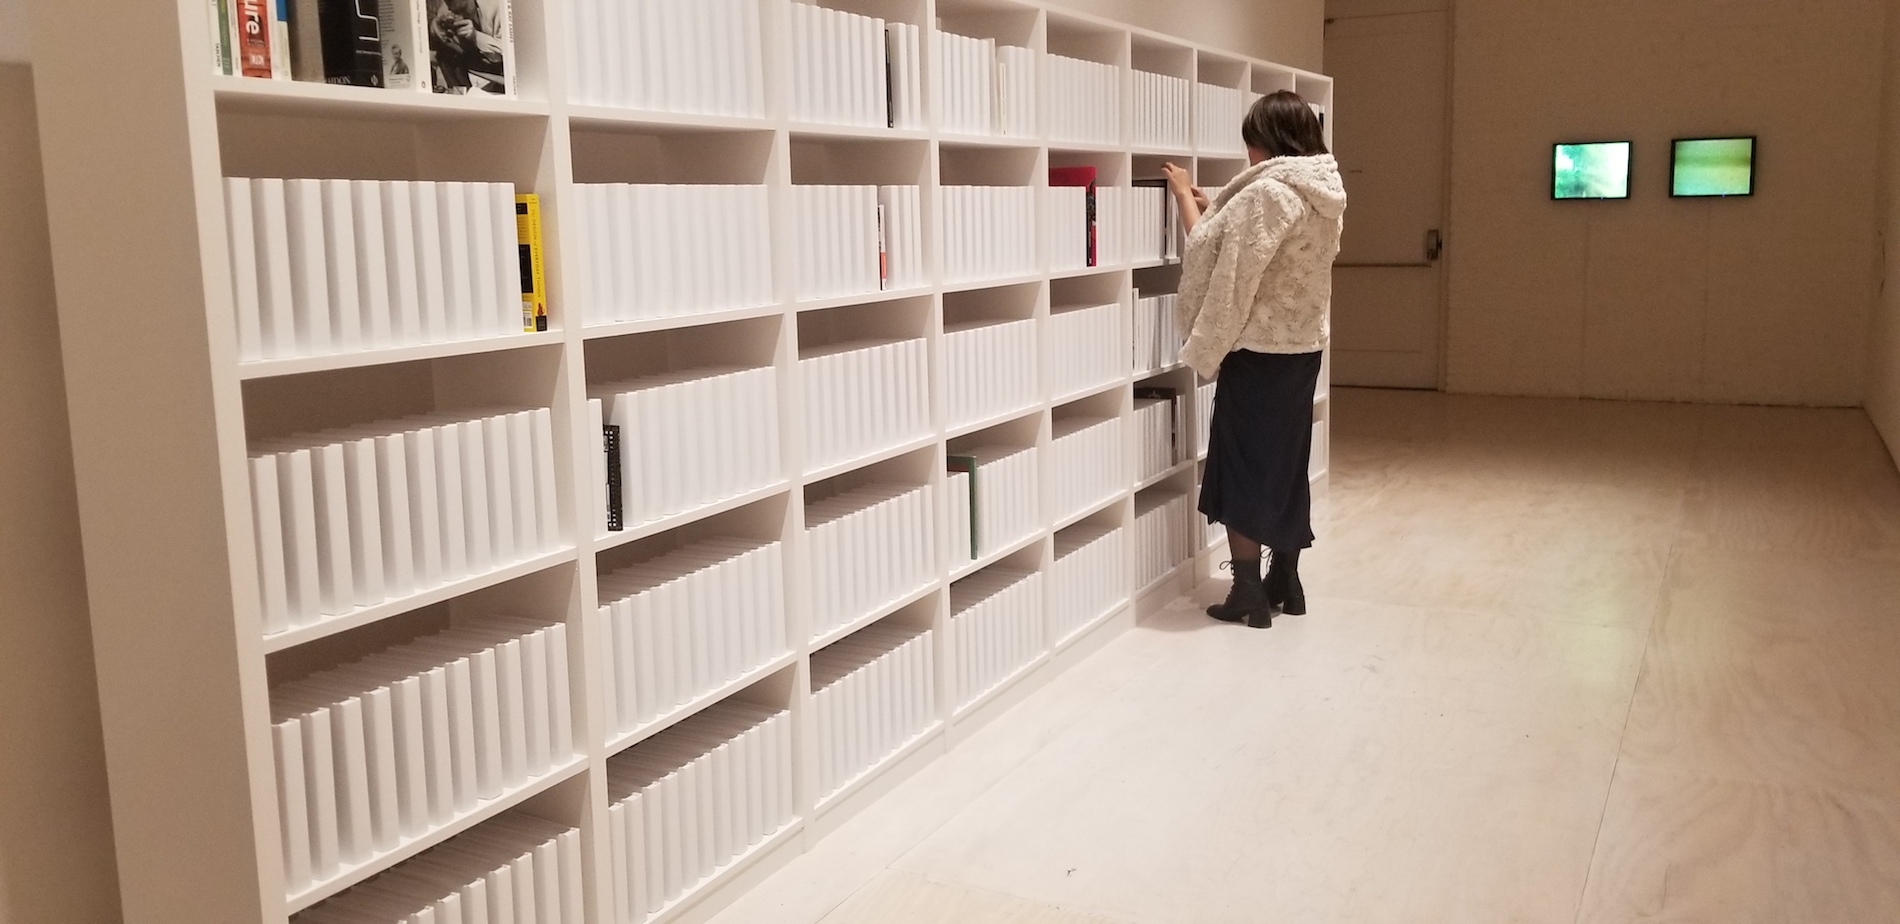 a series of white shelves filled with blank tomes